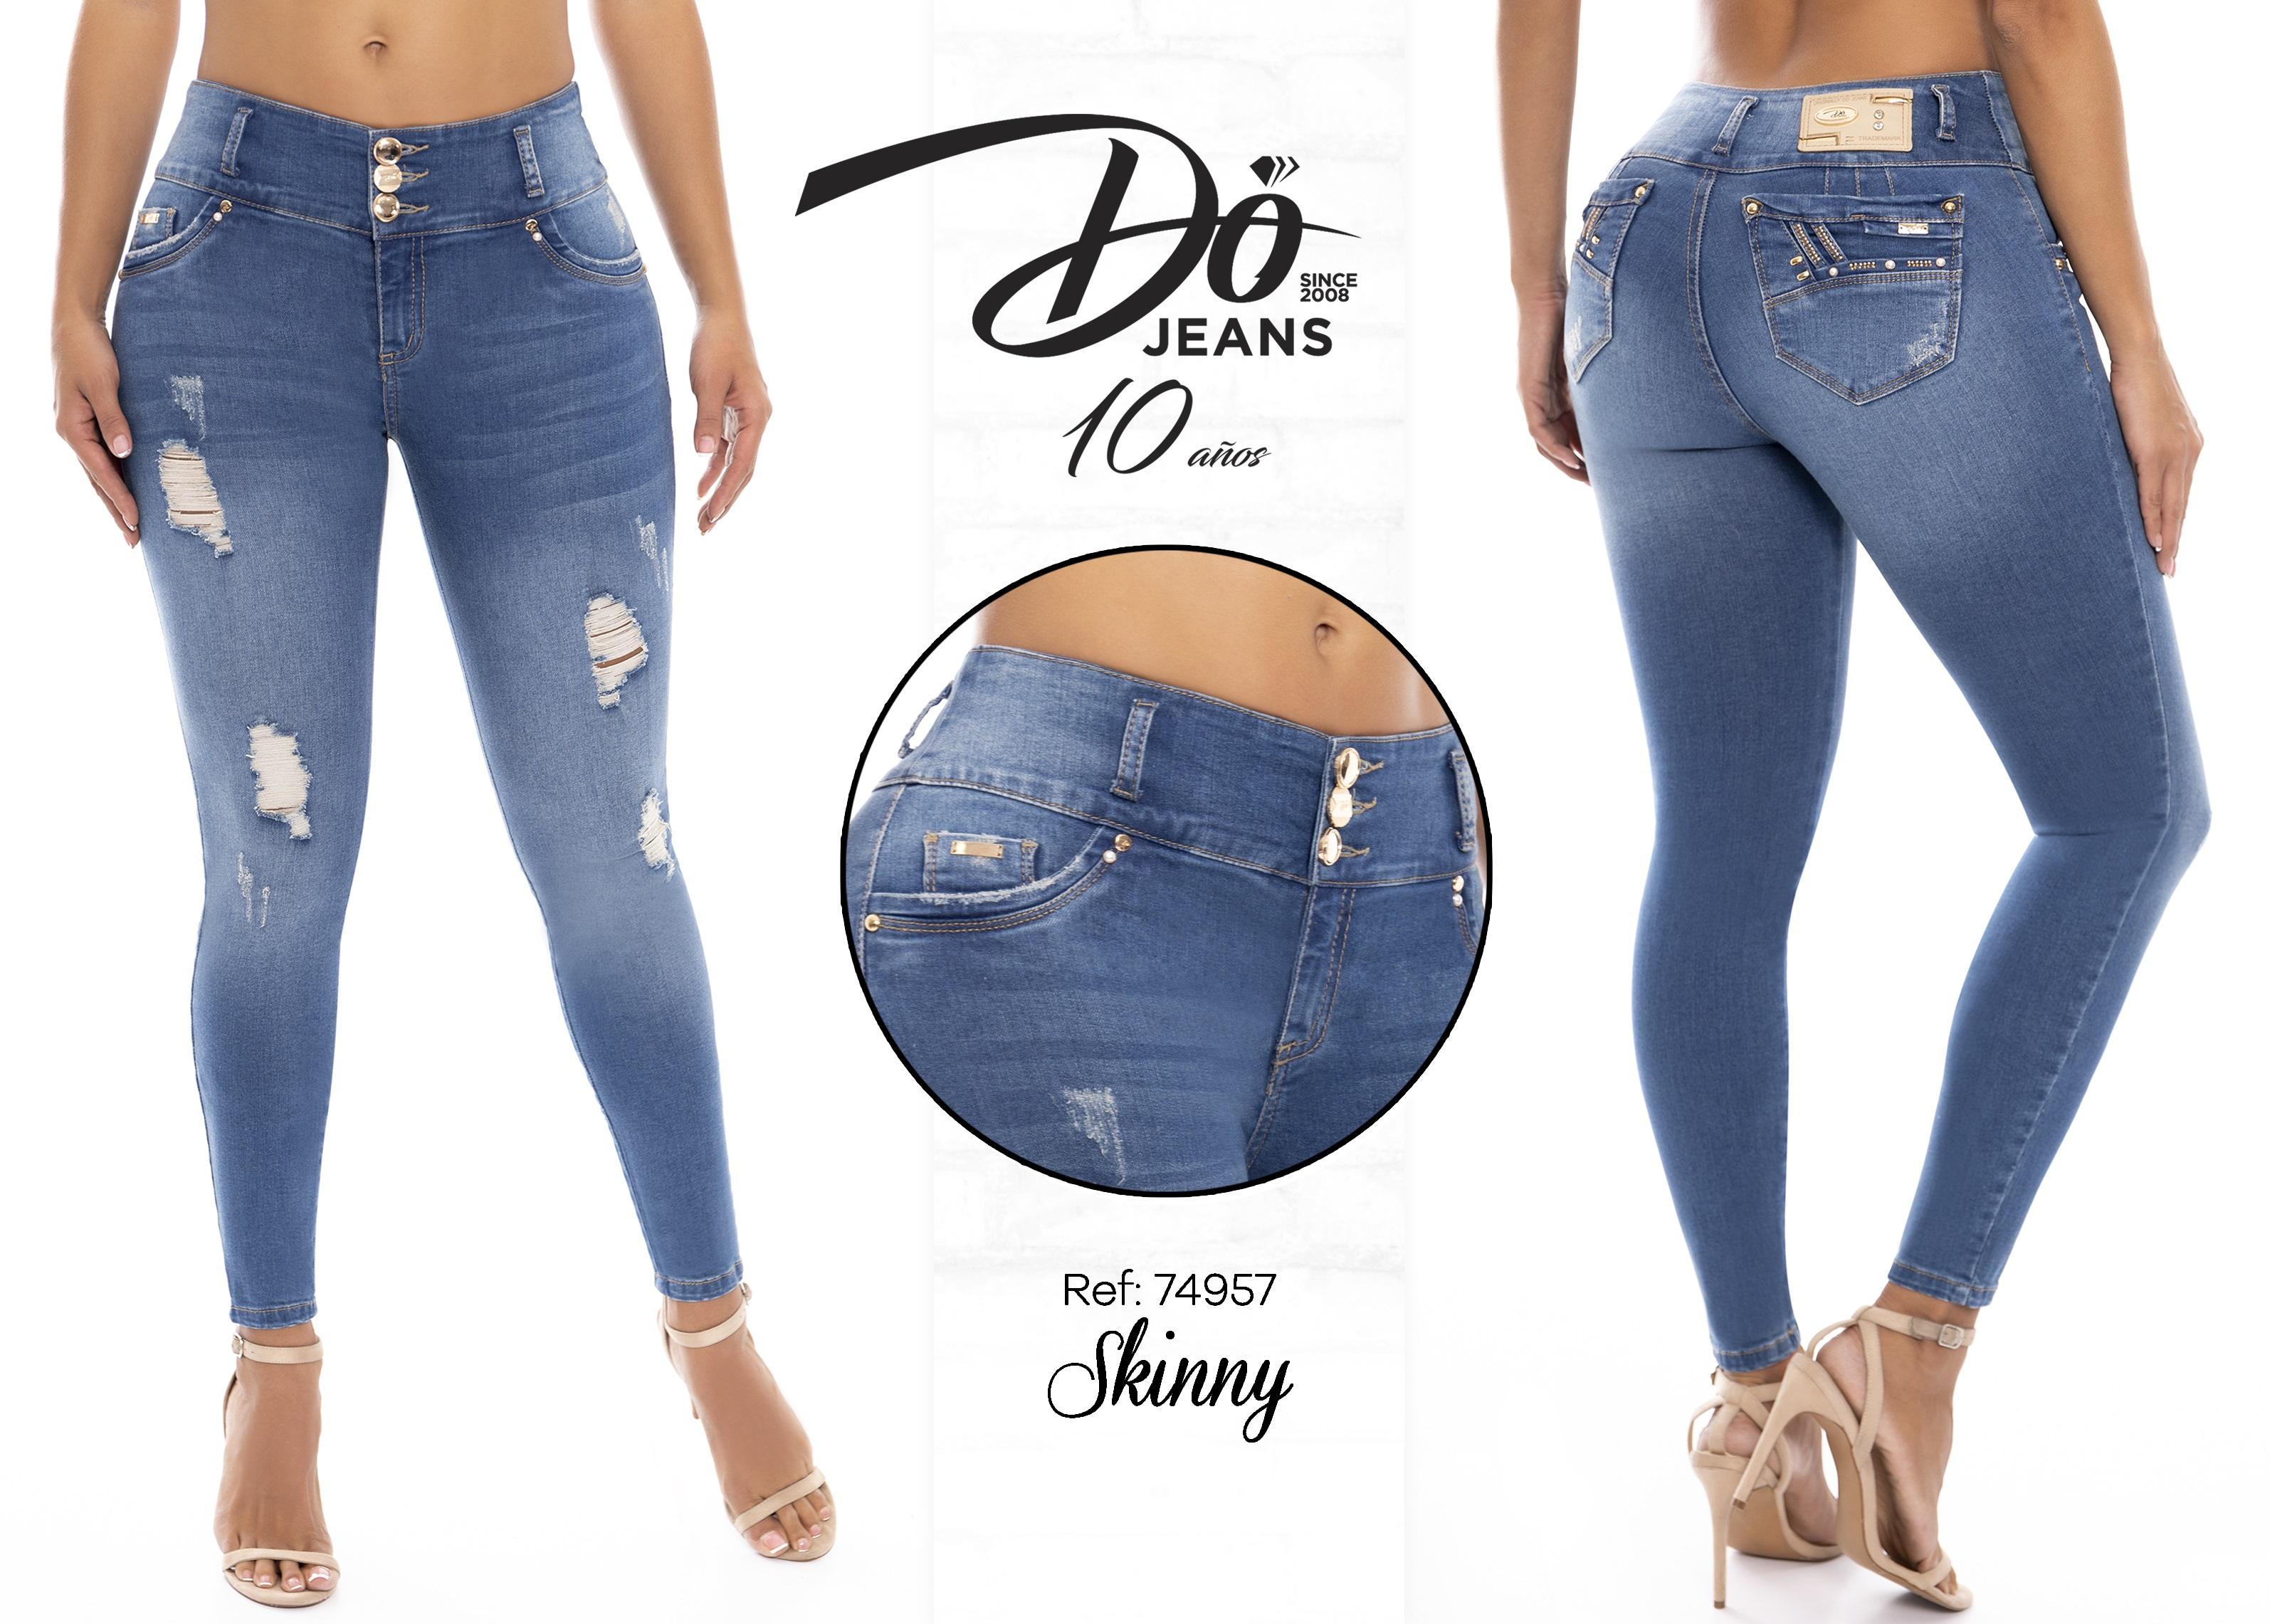 Jeans Levantacola Colombiano - Ref. 248 -74957 D